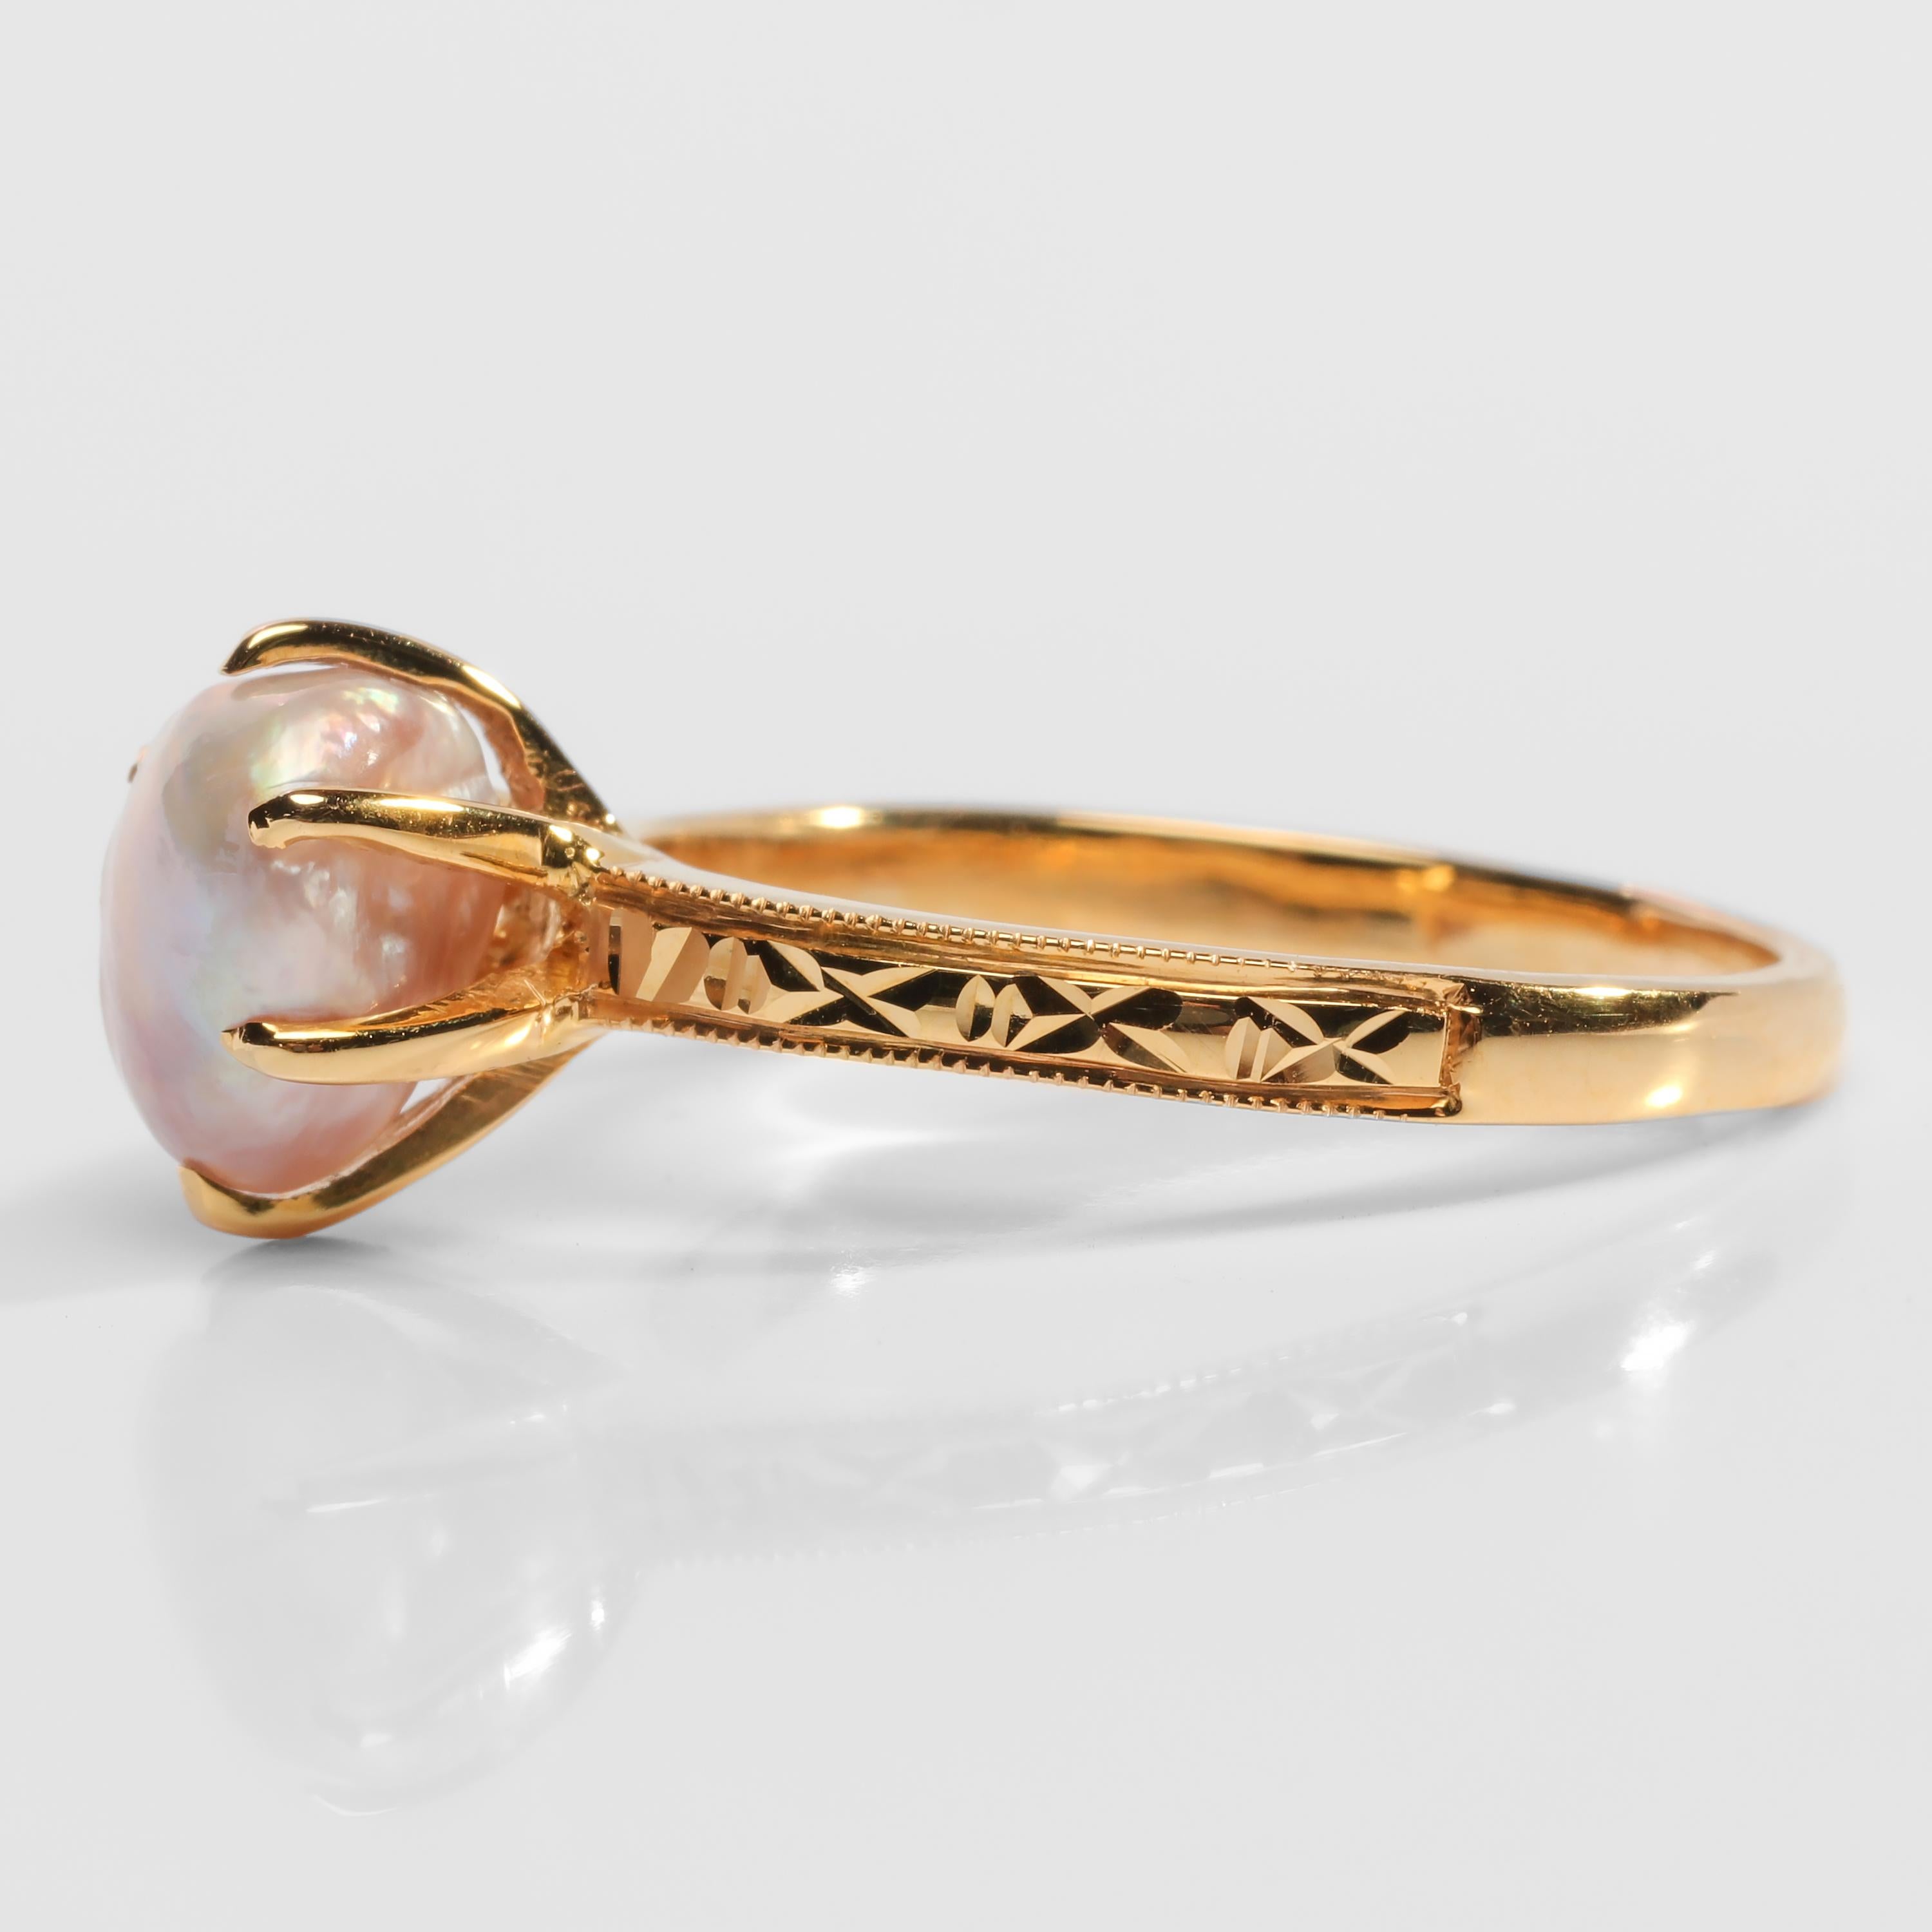 Victorian Basra Pearl Ring of Spectacular Color and Quality Certified Natural